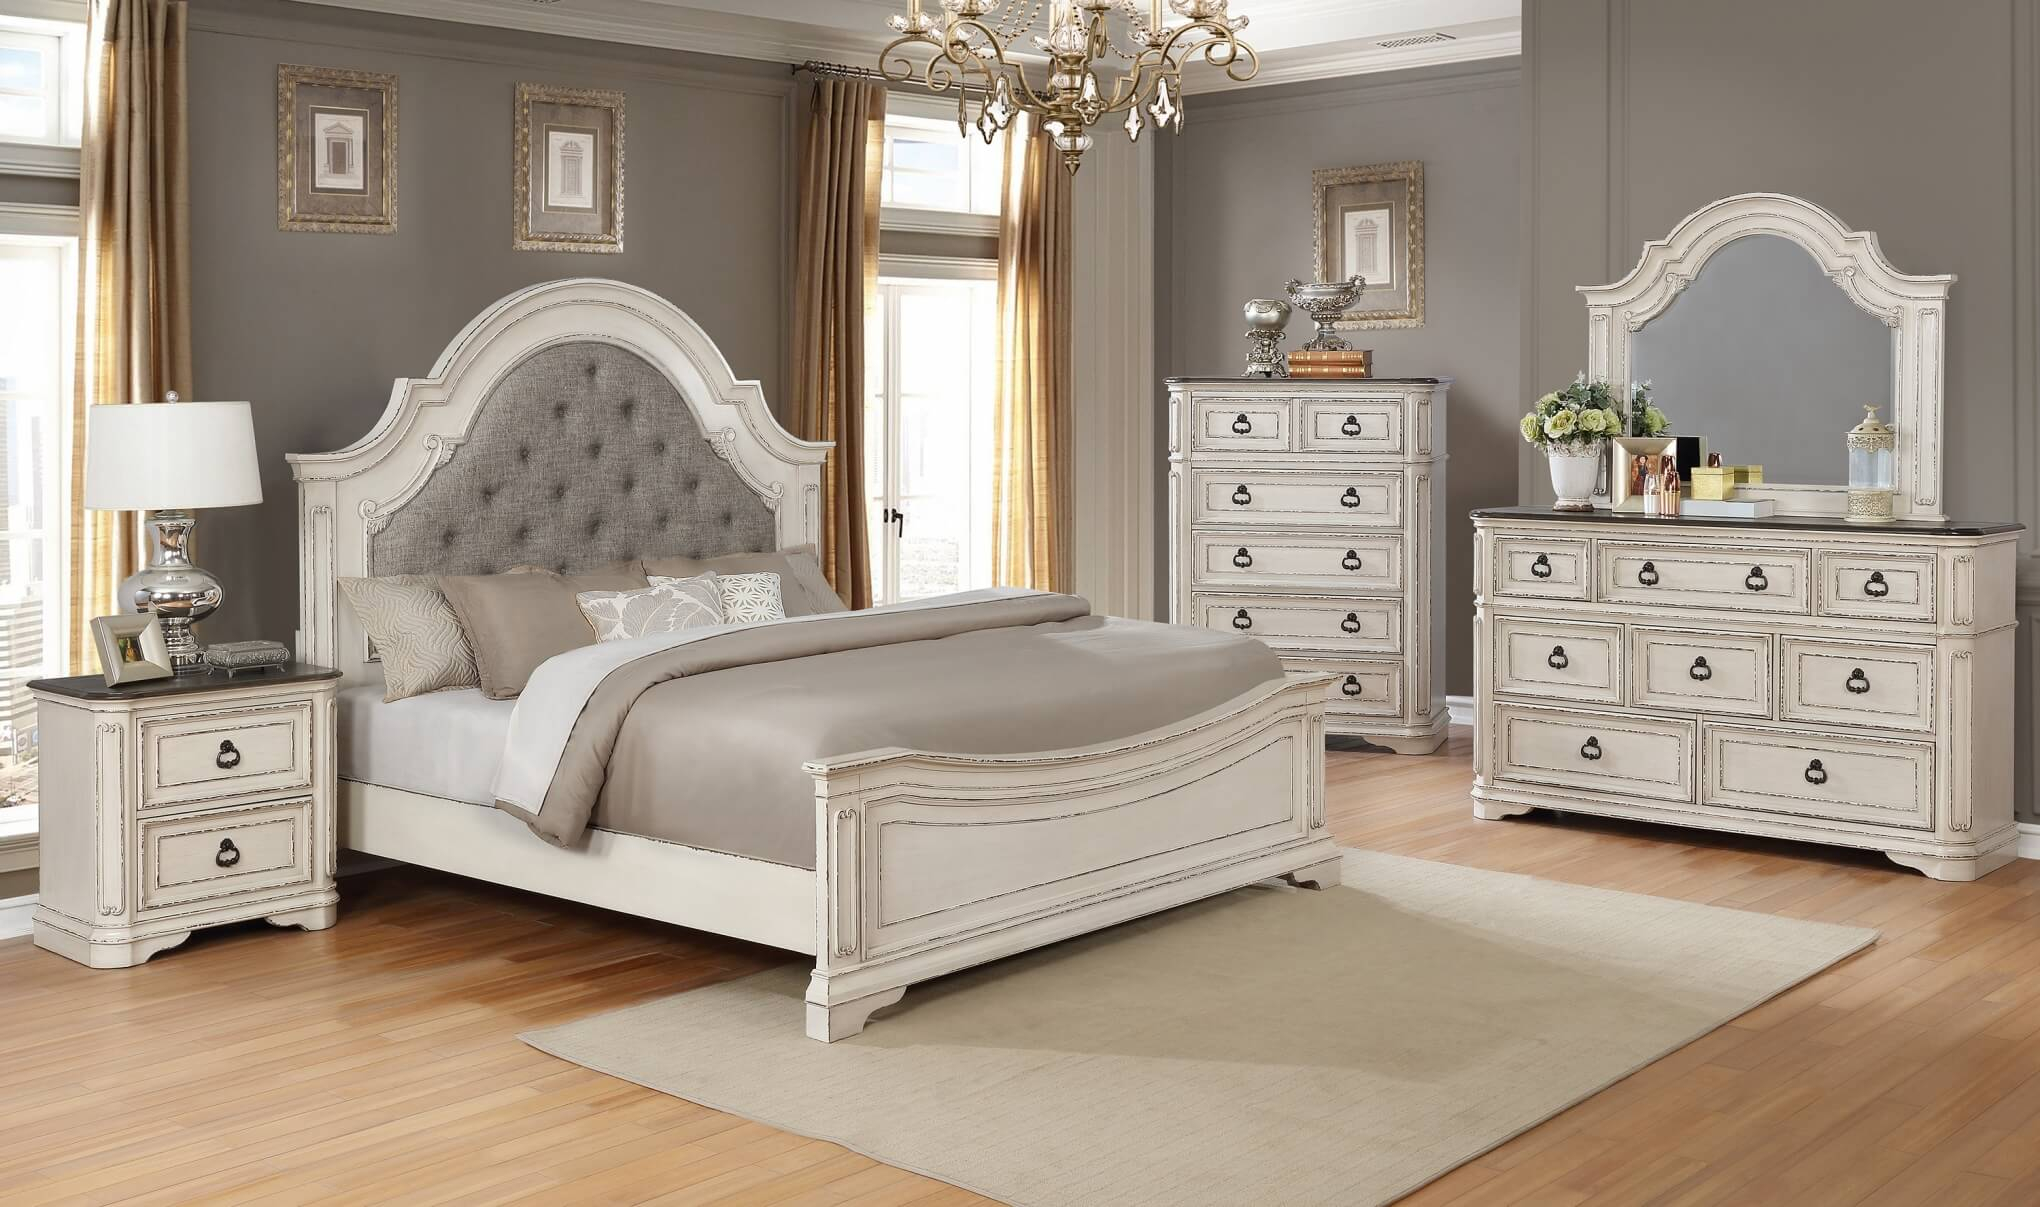 B1640 Magnolia Antique White Bedroom Set pertaining to proportions 2040 X 1207